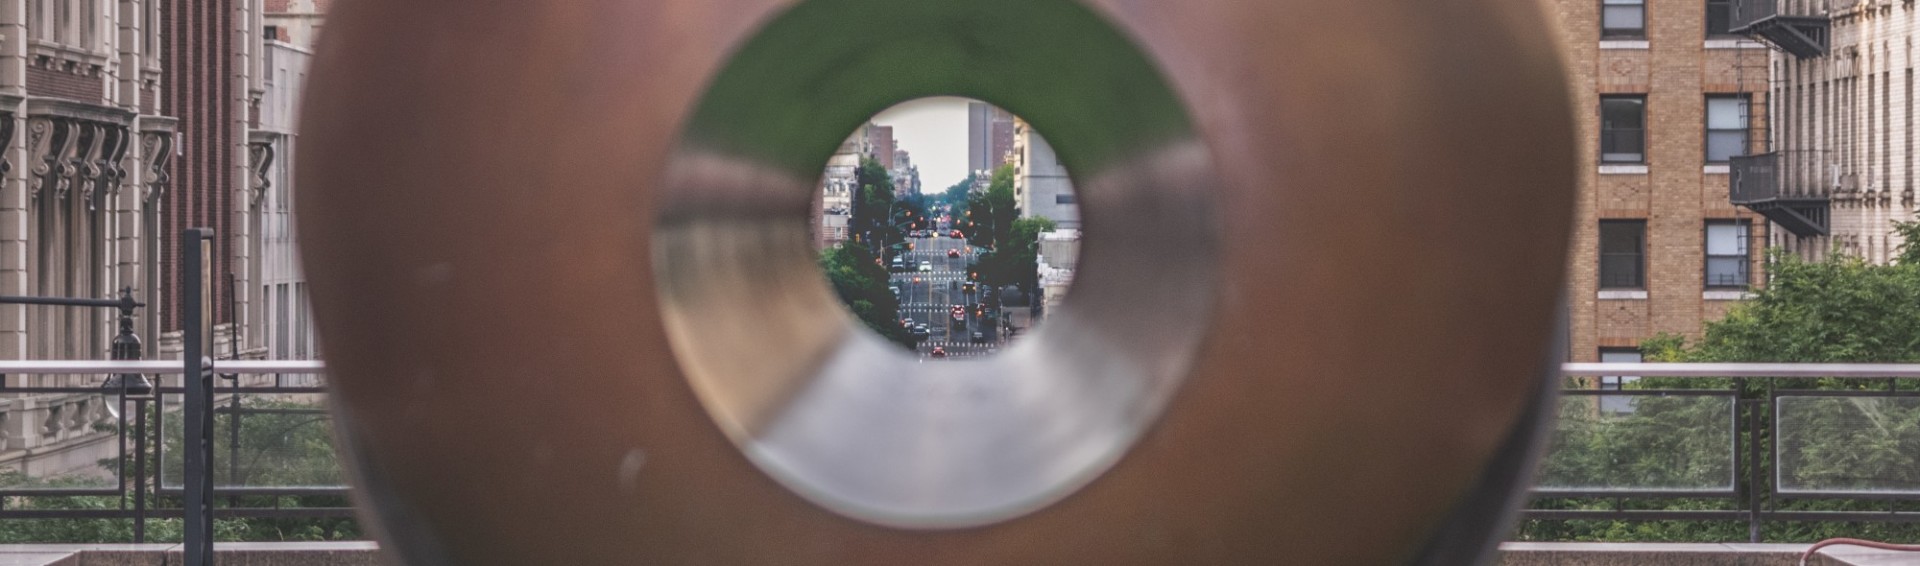 A view of Amsterdam Avenue through the center of a sculpture on Remsen Plaza